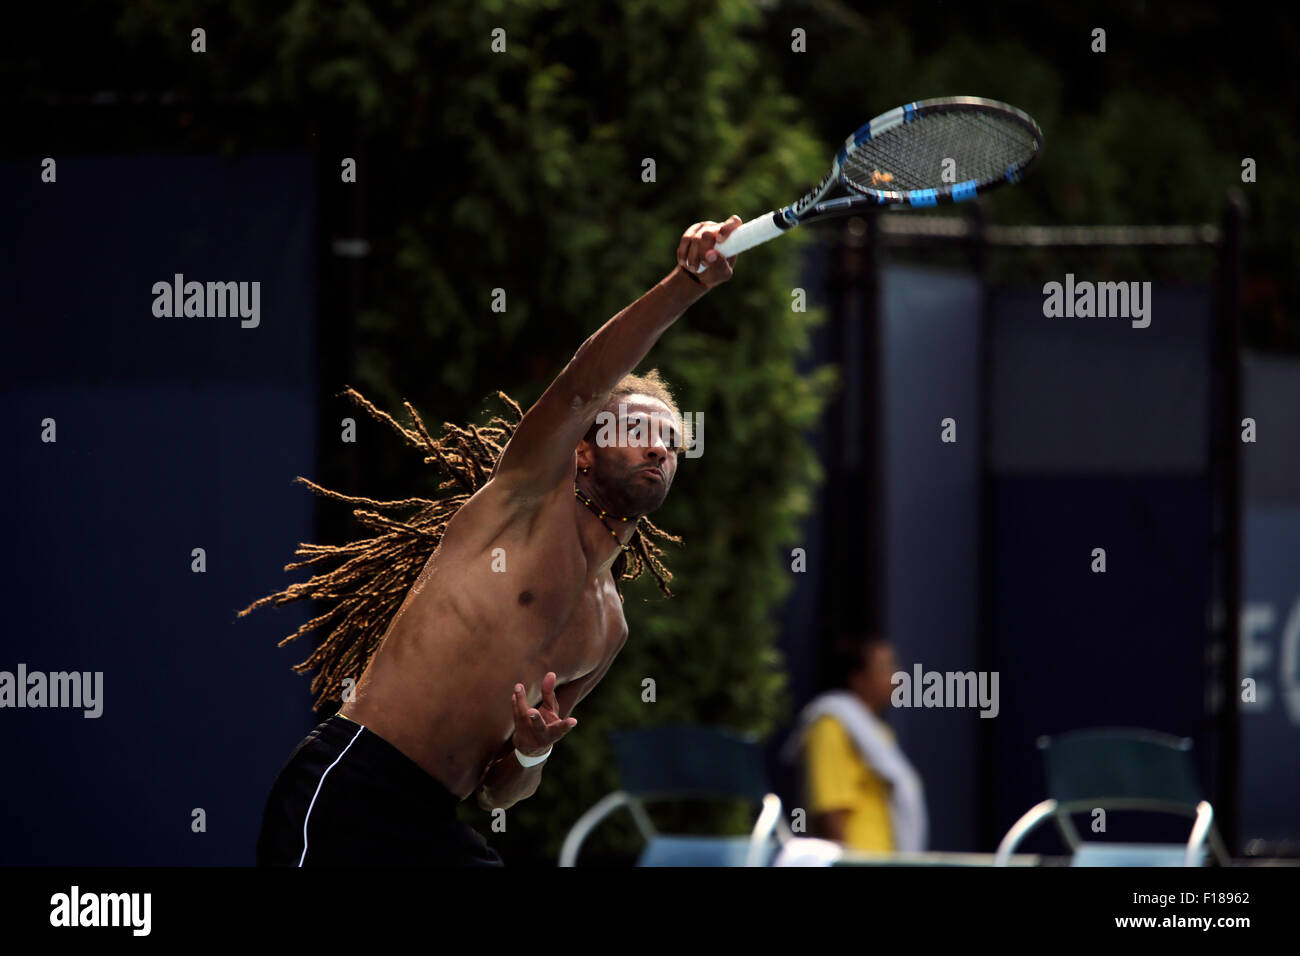 Halle, Germany. 14th June, 2022. Tennis: ATP Tour doubles, men, 1st round,  Hanfmann and Struff (Germany) - Stricker and Brown (Switzerland/Jamaica). Dustin  Brown (l) and Dominic Stricker are on the court. Credit